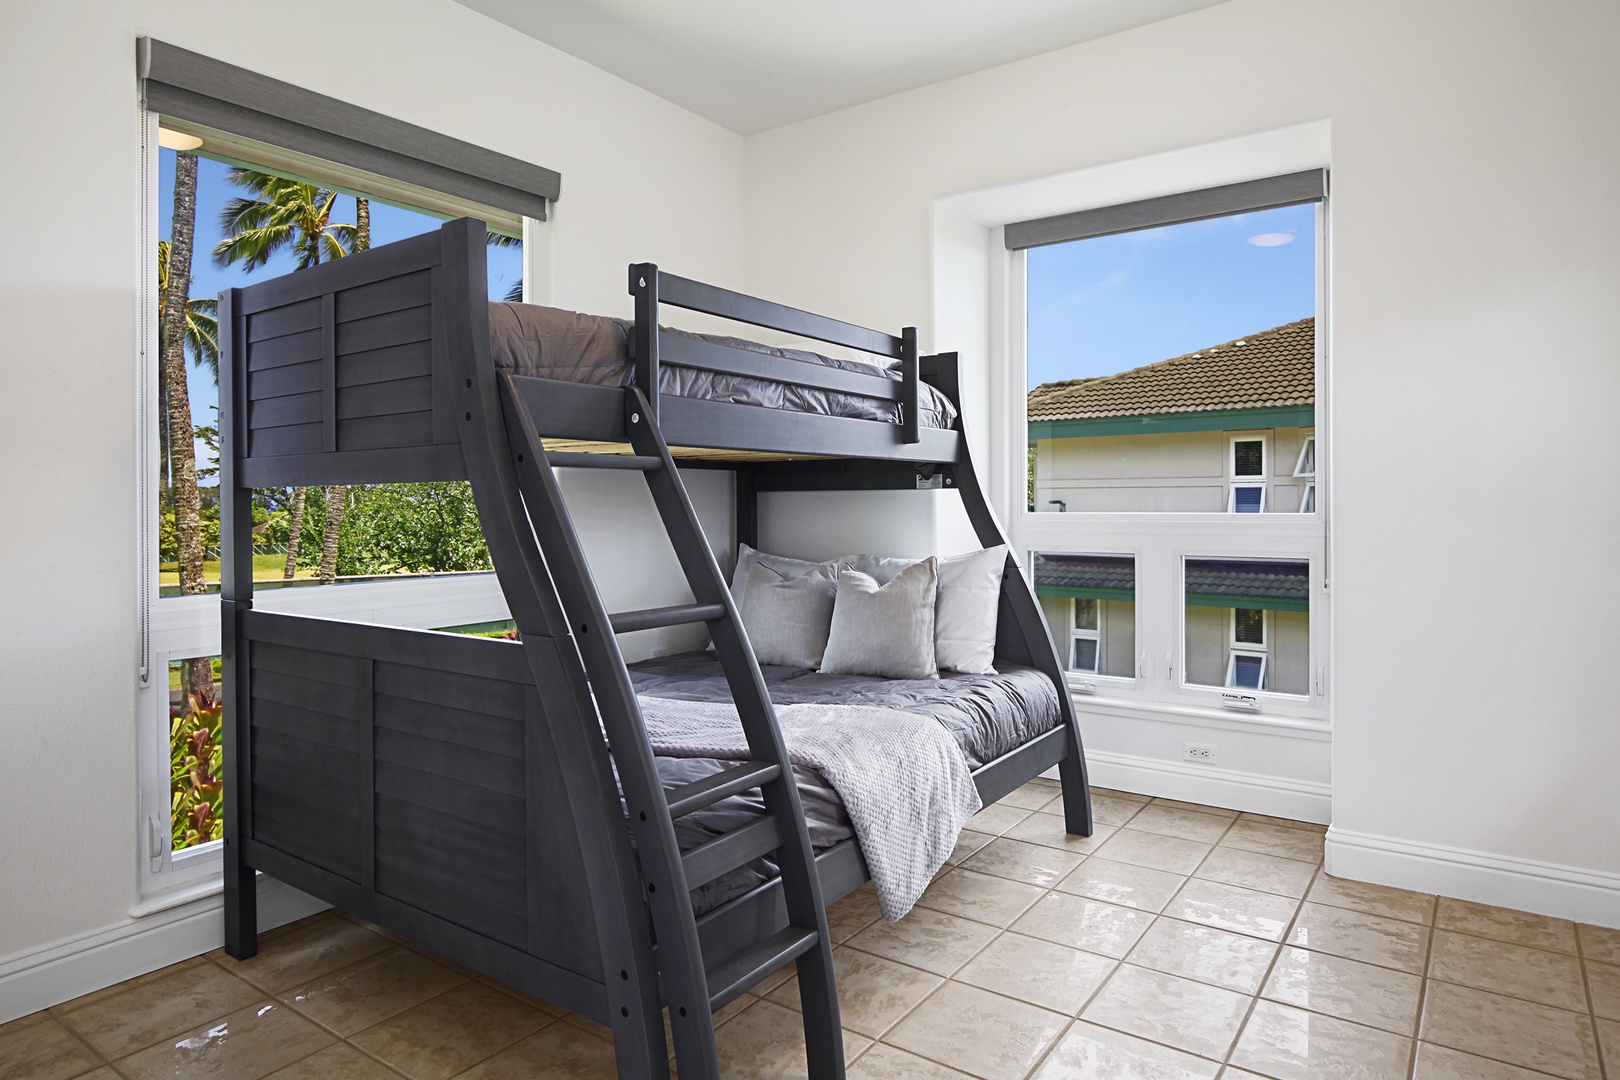 Princeville Vacation Rentals, Villas on the Prince #28 - Guest Bedroom with garden view and split A/C